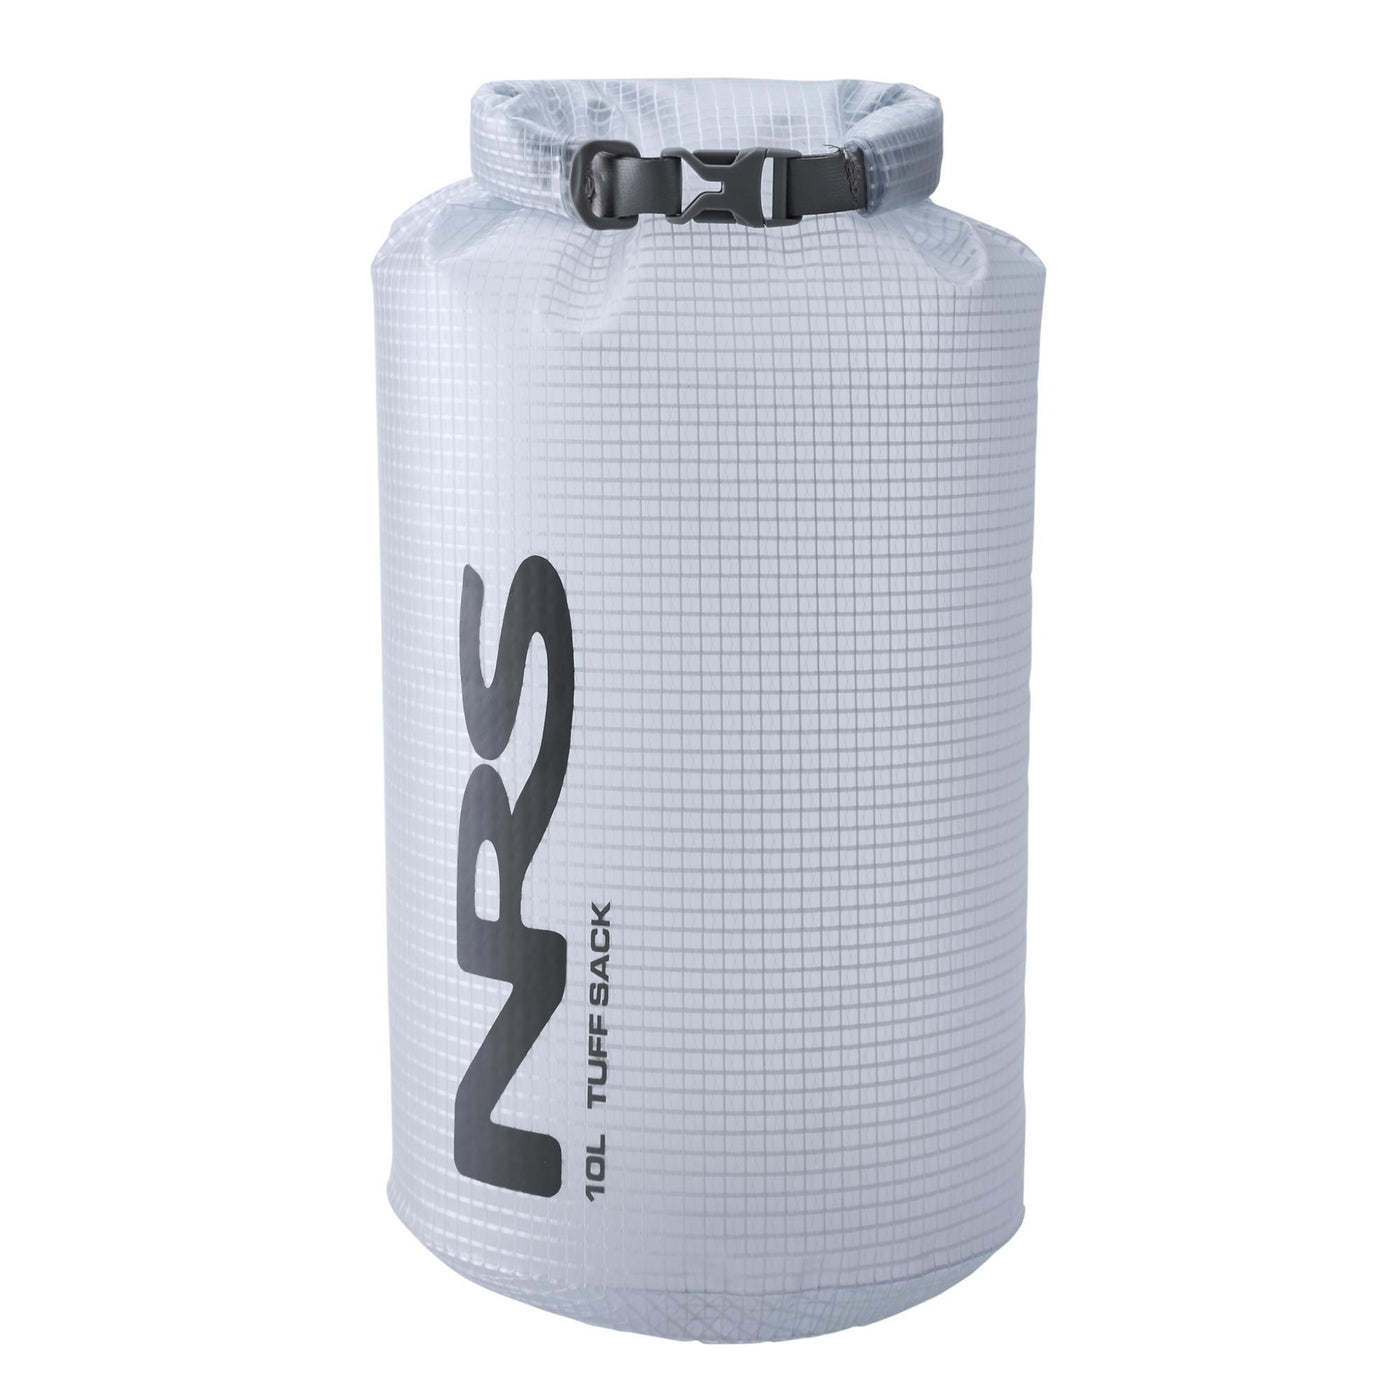 NRS Tuff Sack Dry Bag 45L | Kayak Dry Bags and Accessories | NRS NZ | Further Faster Christchurch NZ #clear